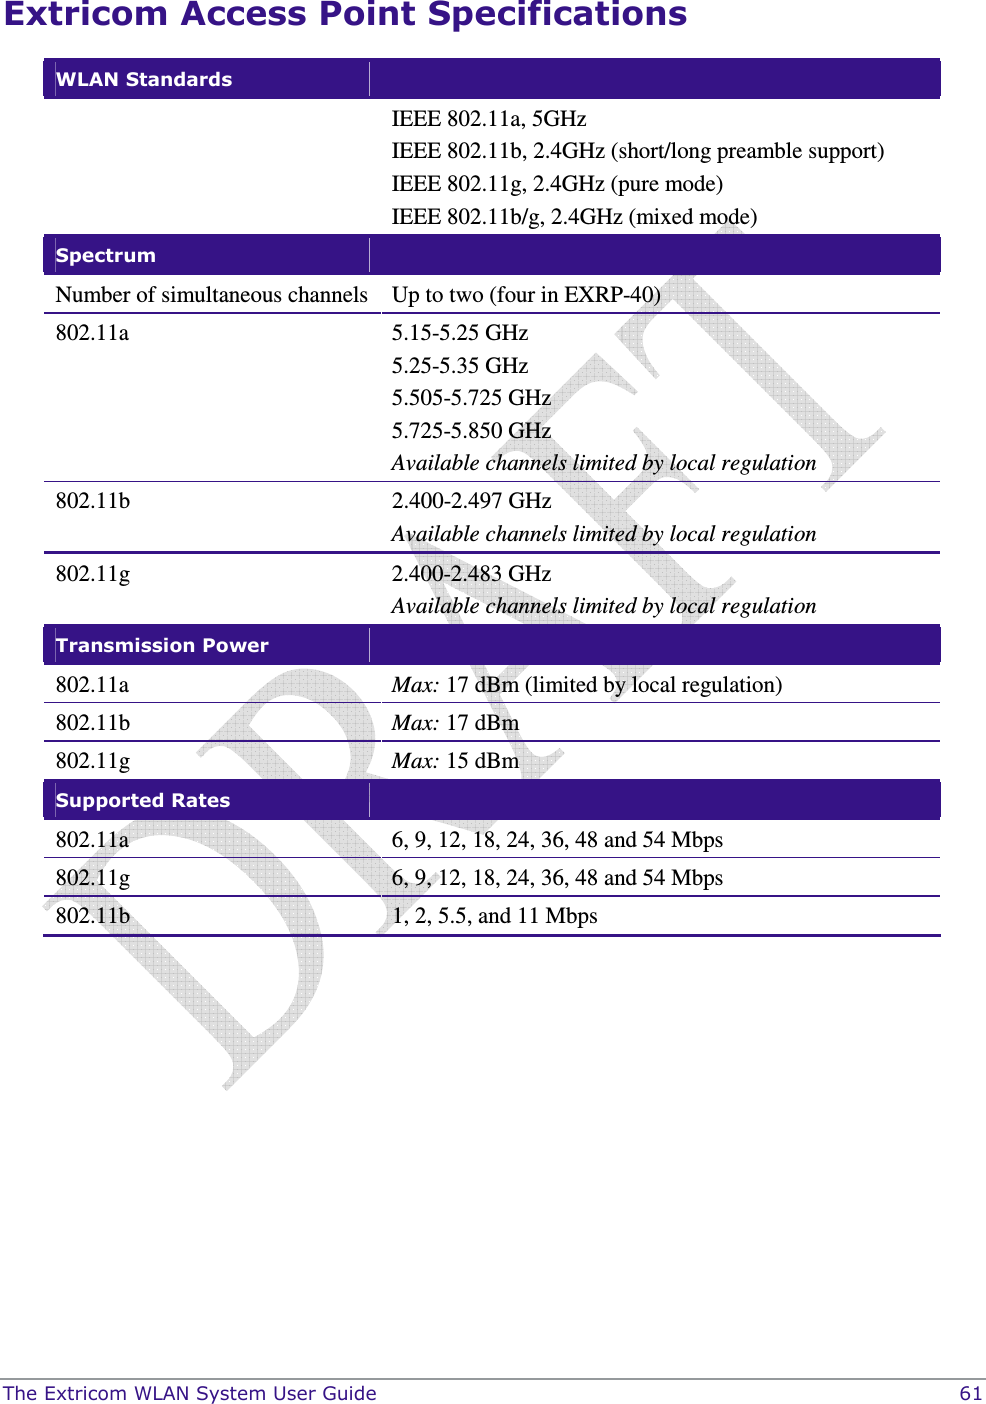  The Extricom WLAN System User Guide    61 Extricom Access Point Specifications WLAN Standards    IEEE 802.11a, 5GHz  IEEE 802.11b, 2.4GHz (short/long preamble support) IEEE 802.11g, 2.4GHz (pure mode) IEEE 802.11b/g, 2.4GHz (mixed mode) Spectrum    Number of simultaneous channels  Up to two (four in EXRP-40) 802.11a  5.15-5.25 GHz 5.25-5.35 GHz  5.505-5.725 GHz  5.725-5.850 GHz Available channels limited by local regulation 802.11b  2.400-2.497 GHz Available channels limited by local regulation 802.11g  2.400-2.483 GHz Available channels limited by local regulation Transmission Power    802.11a  Max: 17 dBm (limited by local regulation) 802.11b  Max: 17 dBm 802.11g  Max: 15 dBm Supported Rates    802.11a  6, 9, 12, 18, 24, 36, 48 and 54 Mbps  802.11g  6, 9, 12, 18, 24, 36, 48 and 54 Mbps 802.11b  1, 2, 5.5, and 11 Mbps  